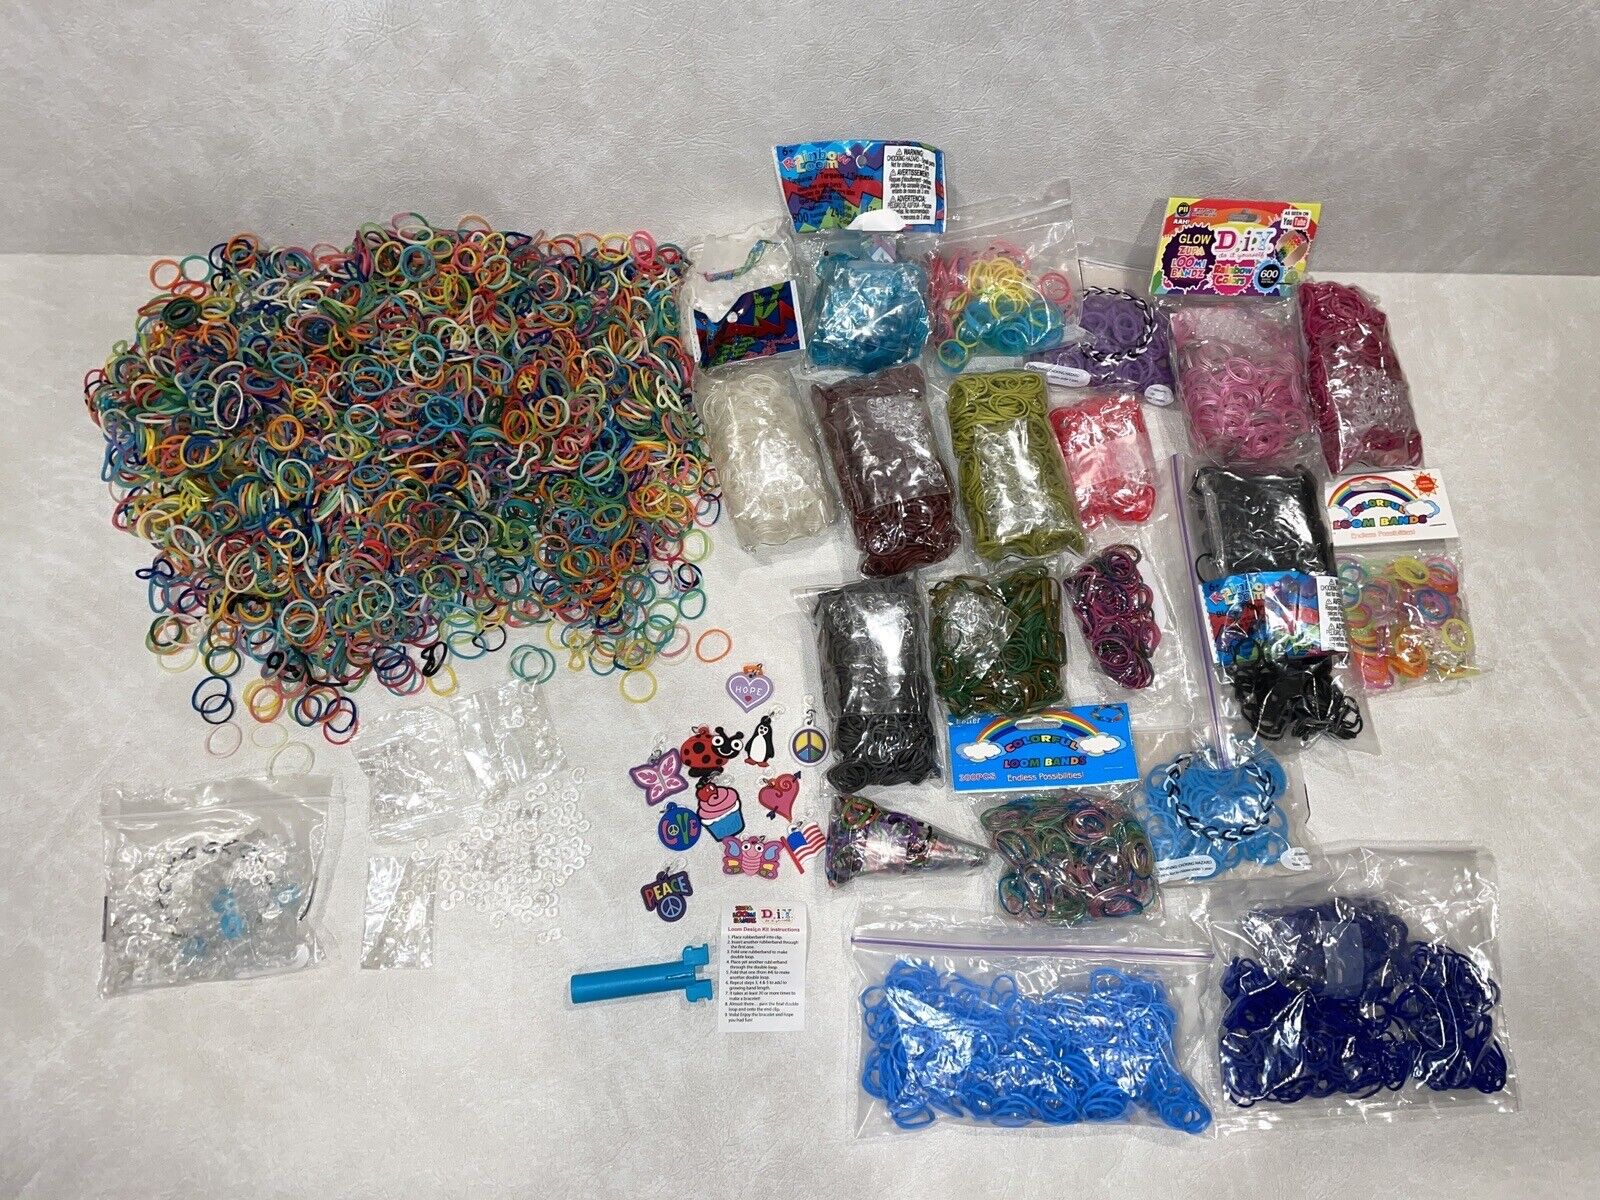  Loom Rubber Bands 4800 pc Refill Kit w 16 Unique Rainbow Colors  (300 of Each) & 200 Clips - Works w All Rubber Band Jewelry Looms - DIY  Gift for Girls